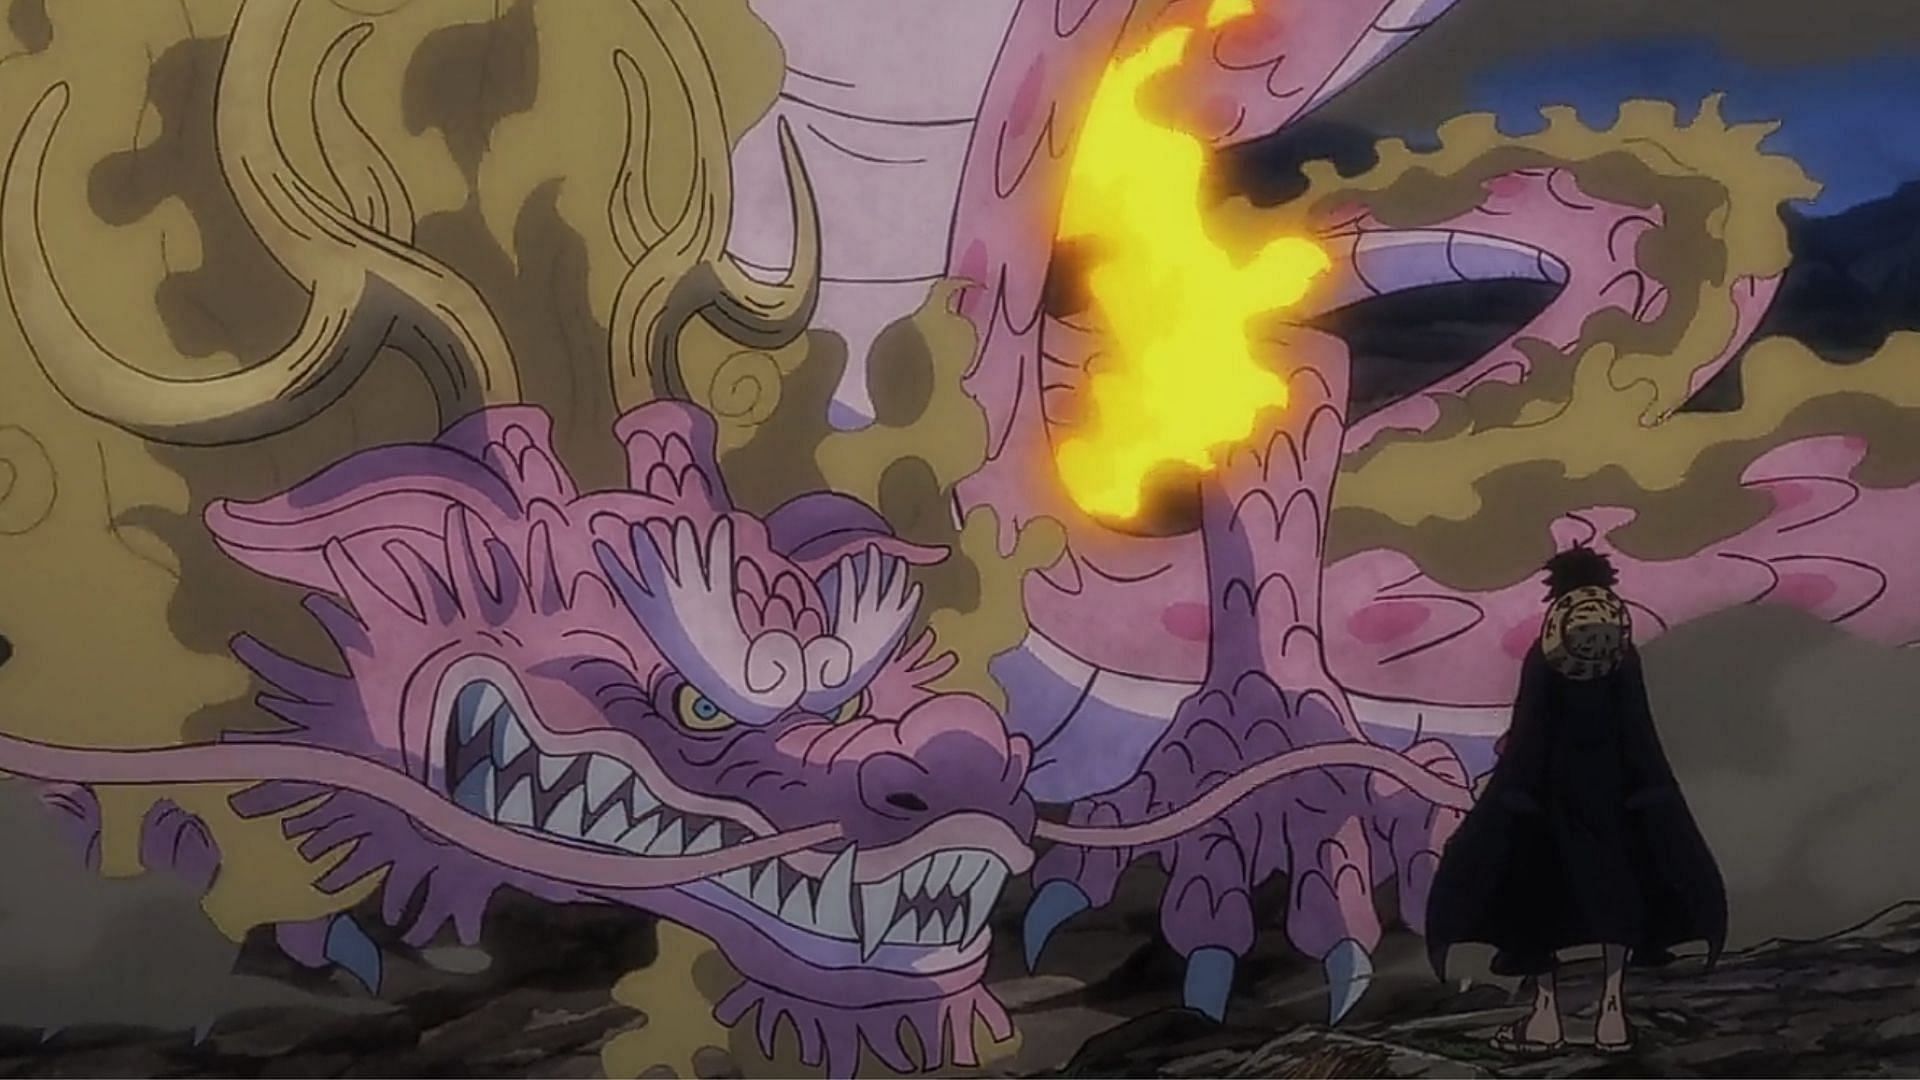 Fans will finally get to see just how combat-ready Momonosuke is in One Piece Episode 1050 (Image via Toei Animation)